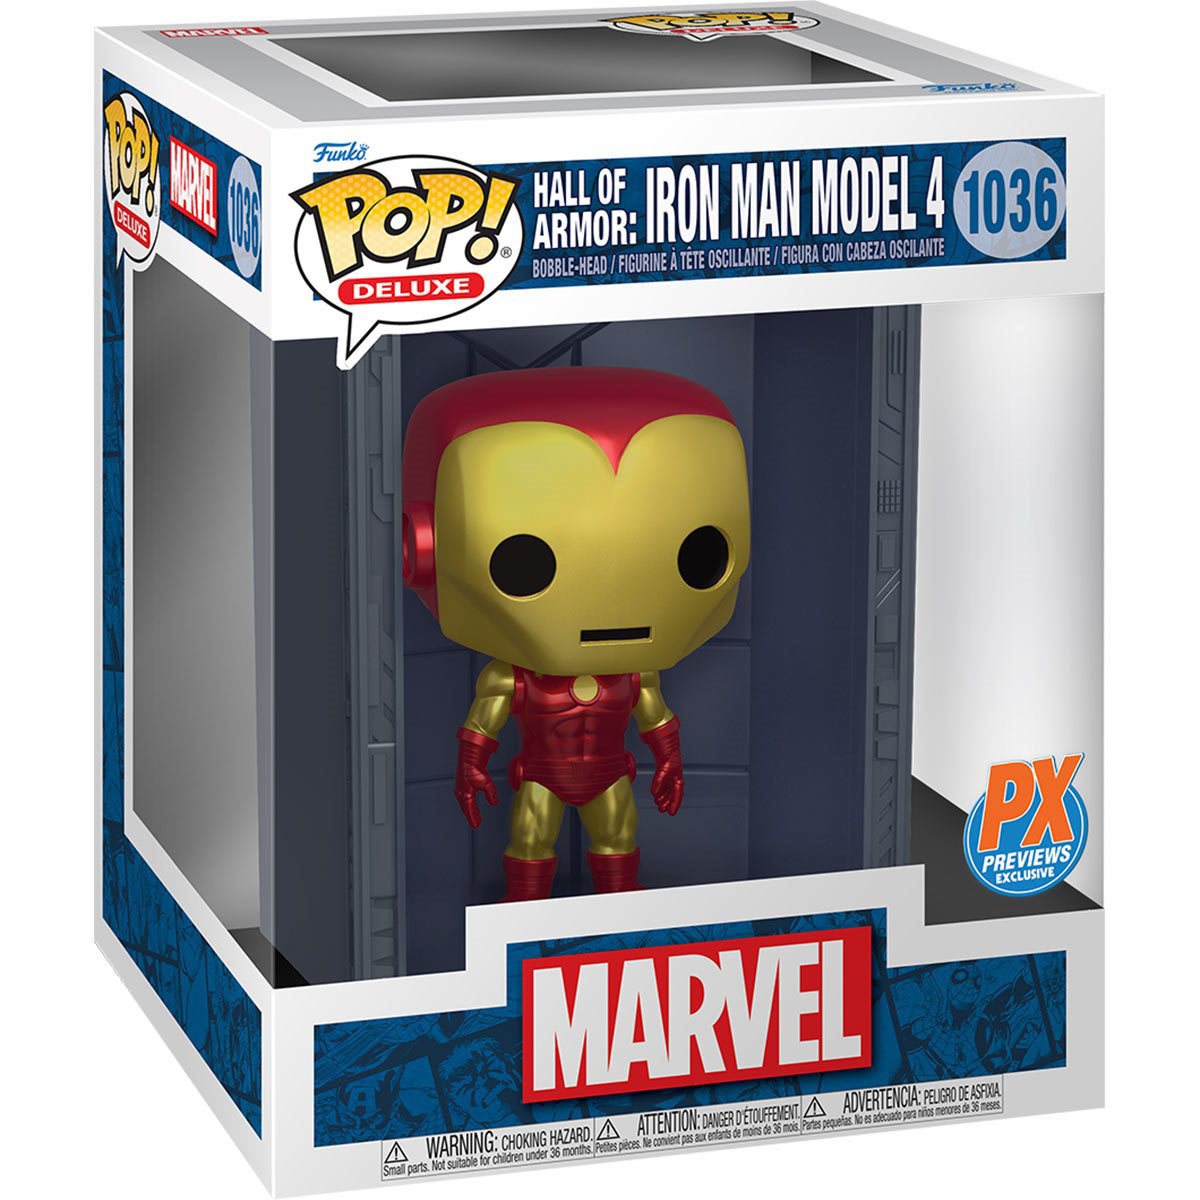 Up To 68% Off on Funko Pop! Horror-themed Figu